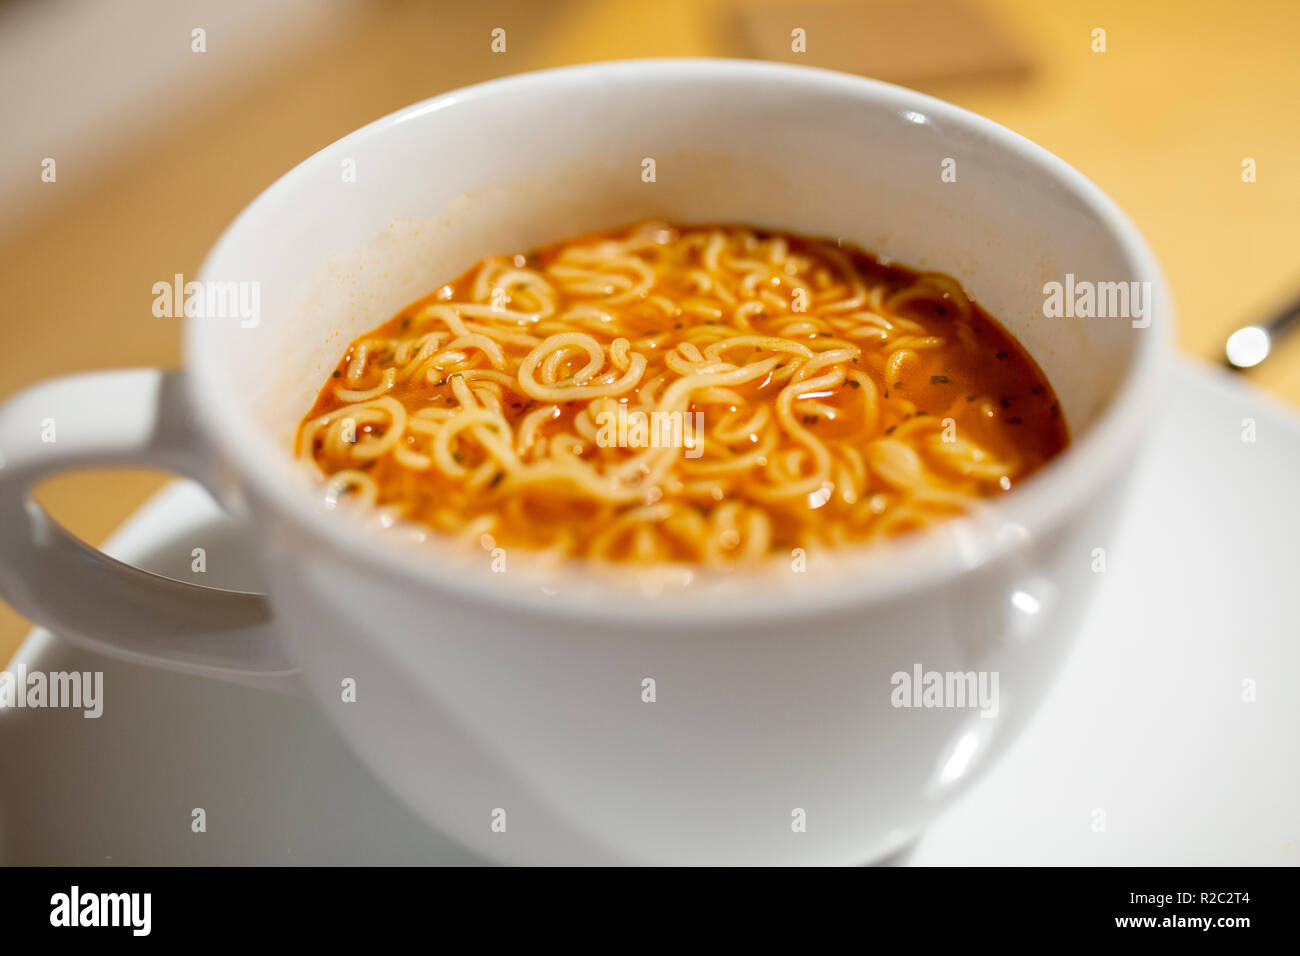 Warme würzige Nudelsuppe closeup mit out of focus Elemente Stockfoto